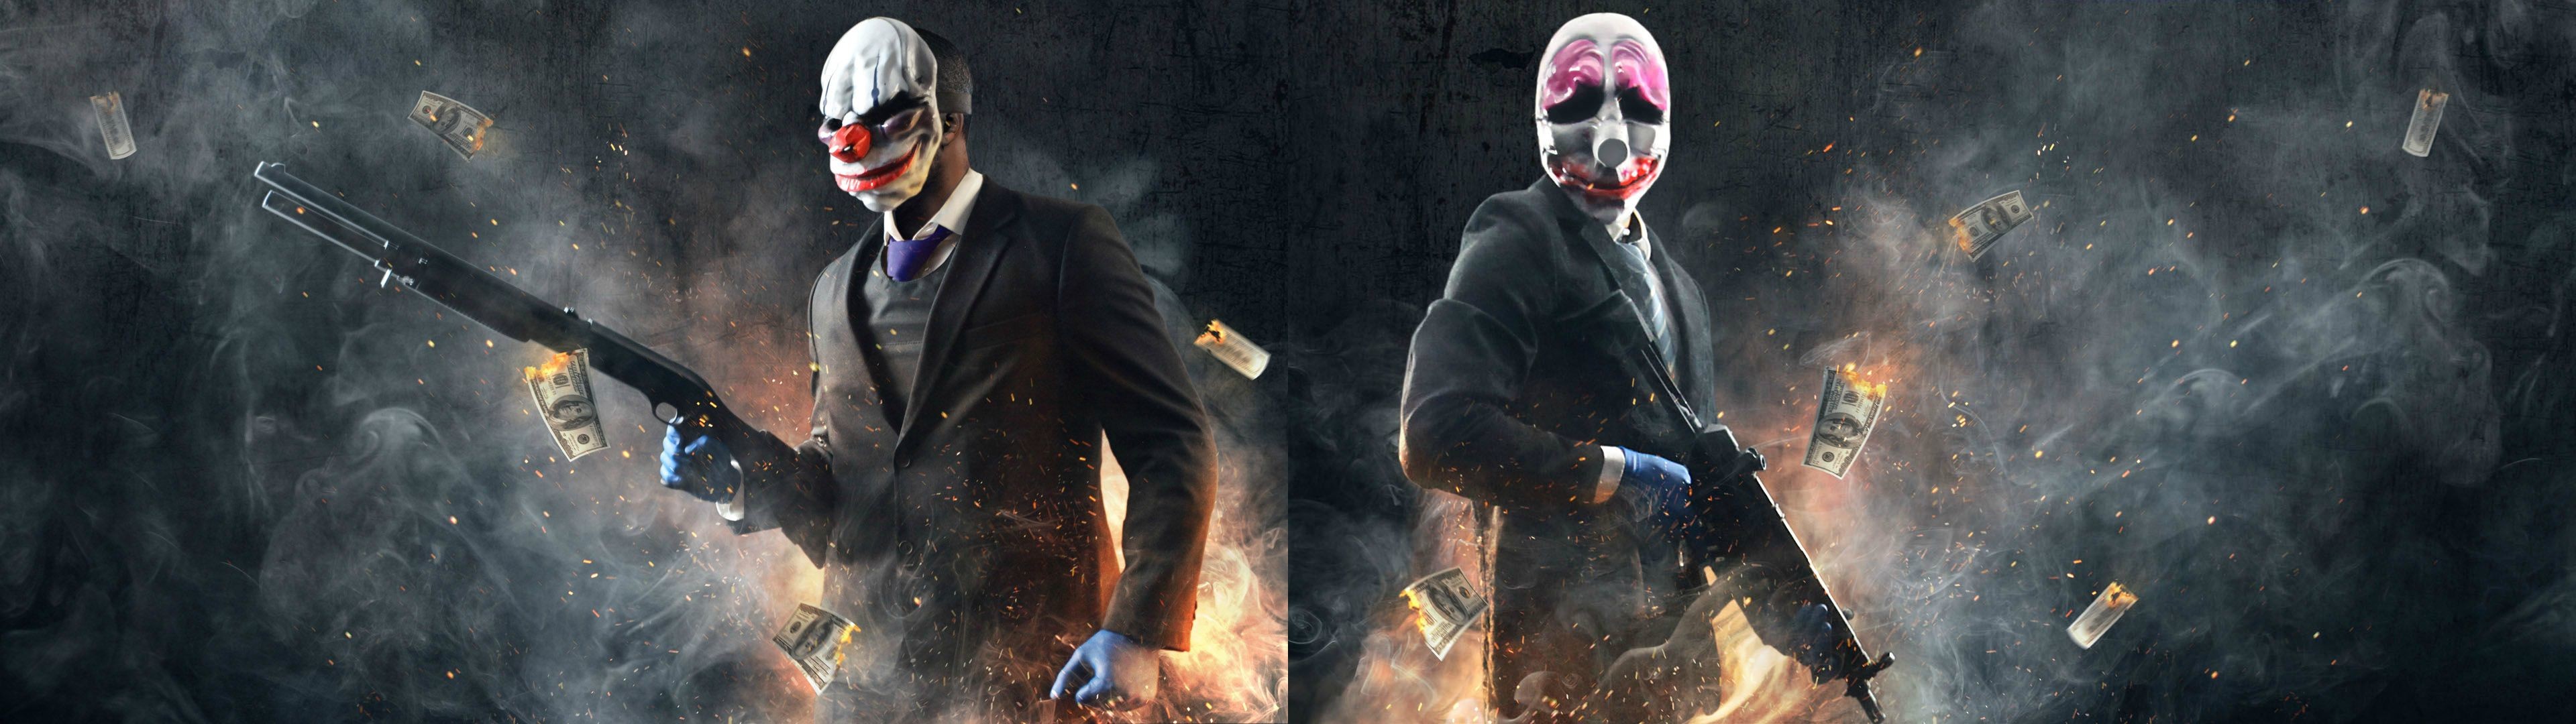 3840x1080 A Payday 2 dual monitor wallpaper i made from steam cards .